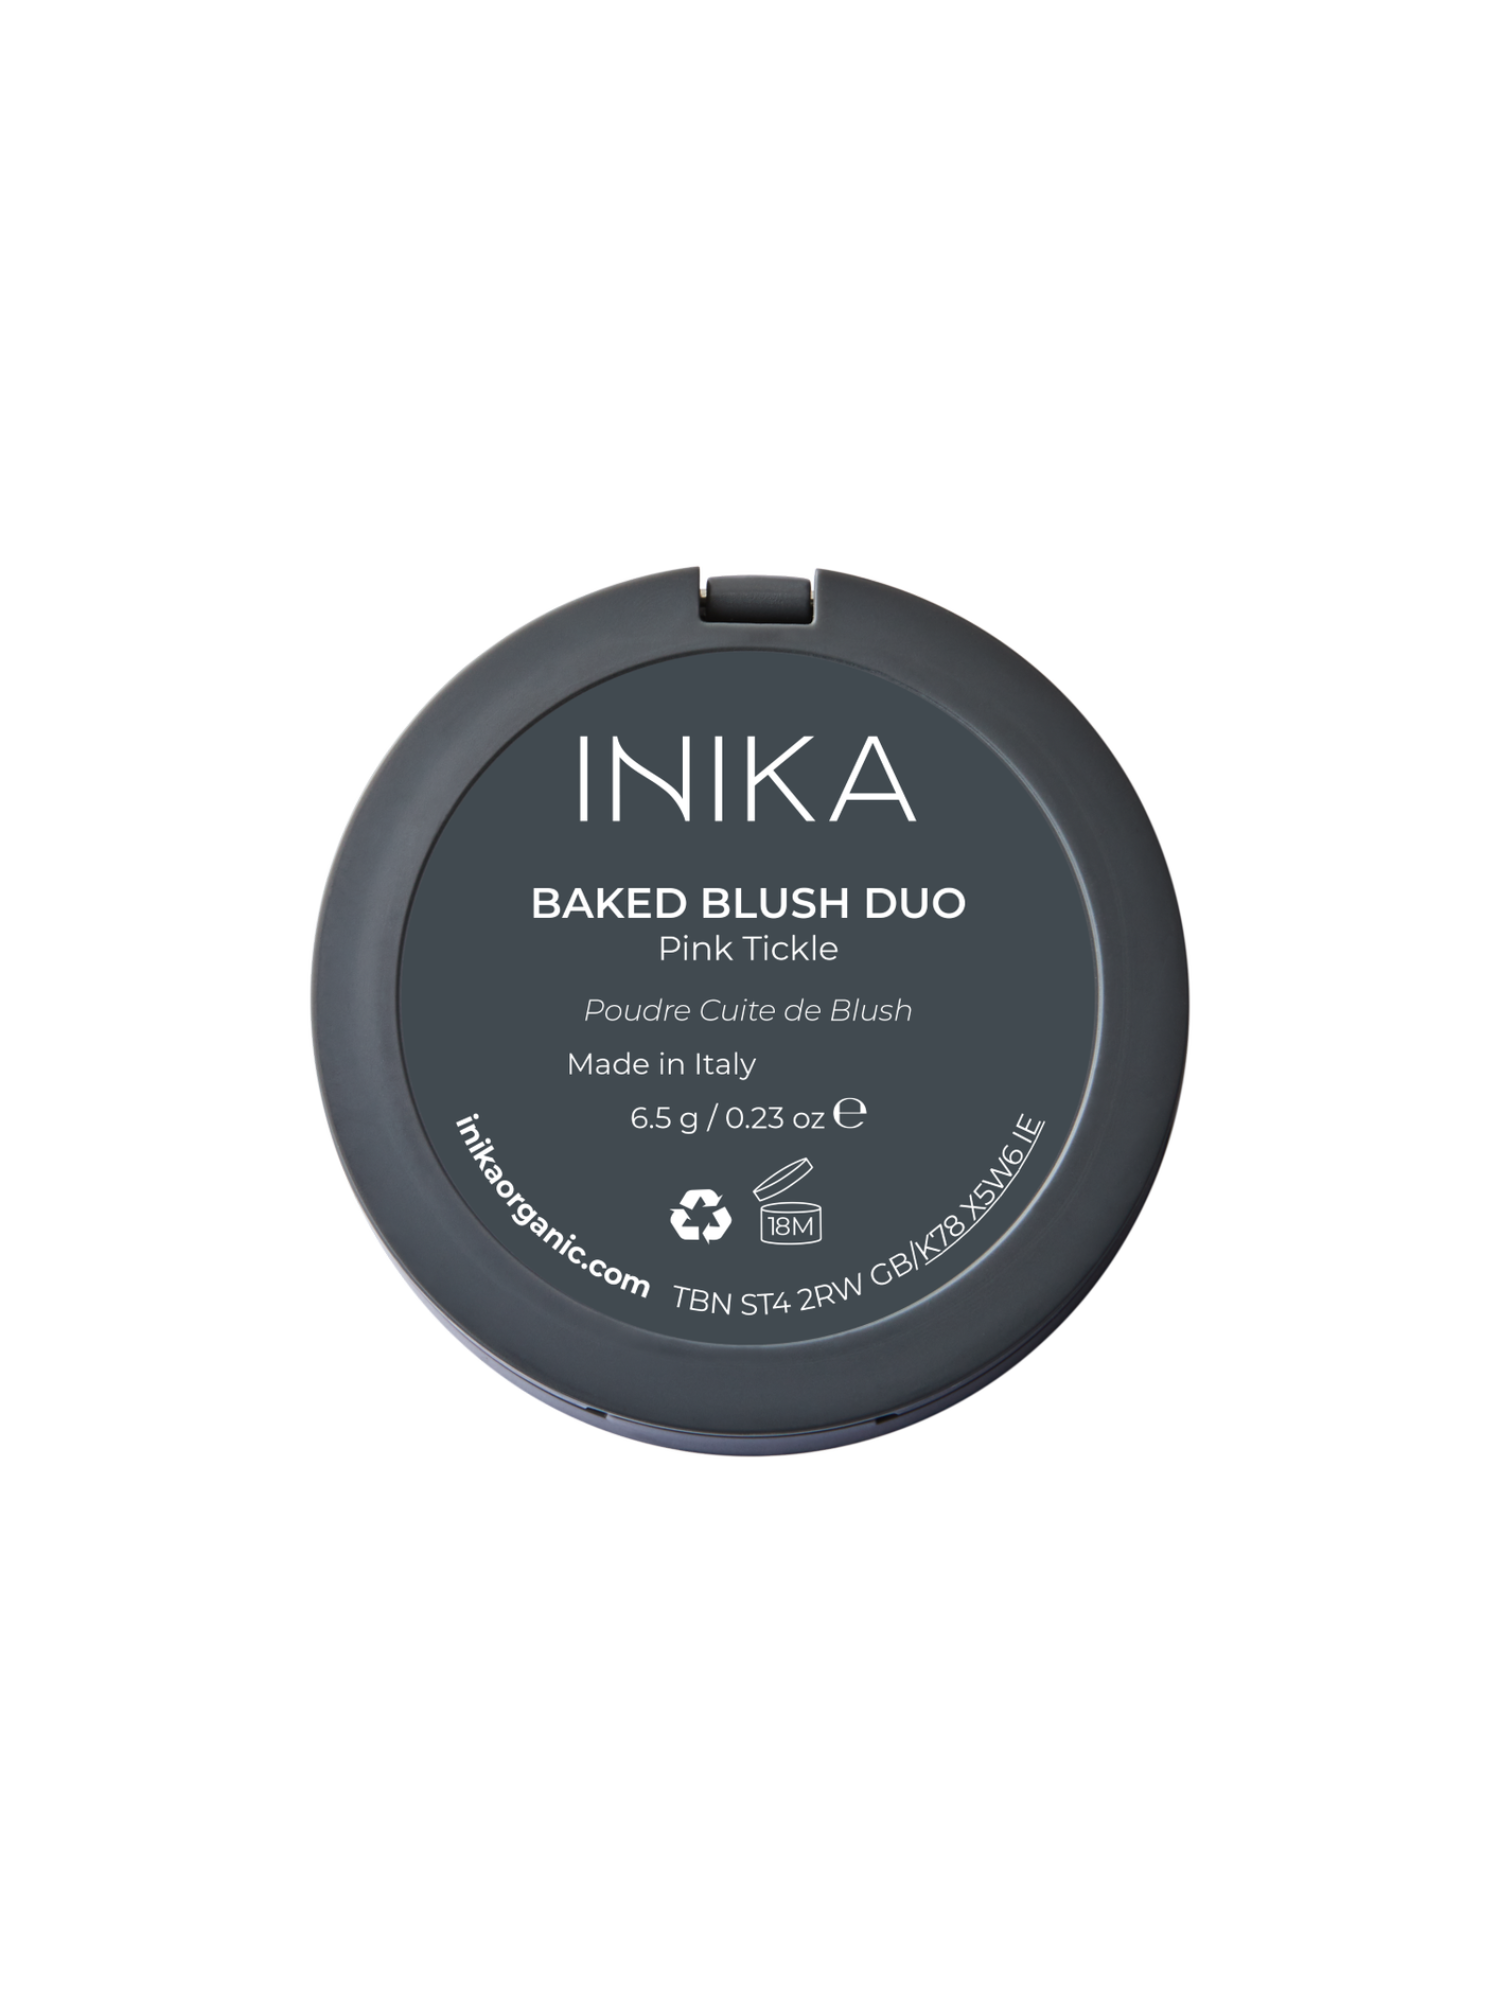 Inika Organic, Baked Mineral Bronzer, Natuurlijke Bronzer, Mineral Bronzer Sunkissed, Mineral Bronzer Sunbeam, Nourished x INIKA Organics, Natuurlijke Foundation, Vegan Foundation, Natuurlijke Make-up, Mineral Blush, Baked Blush Duo, Baked Blush Duo Pink Tickle